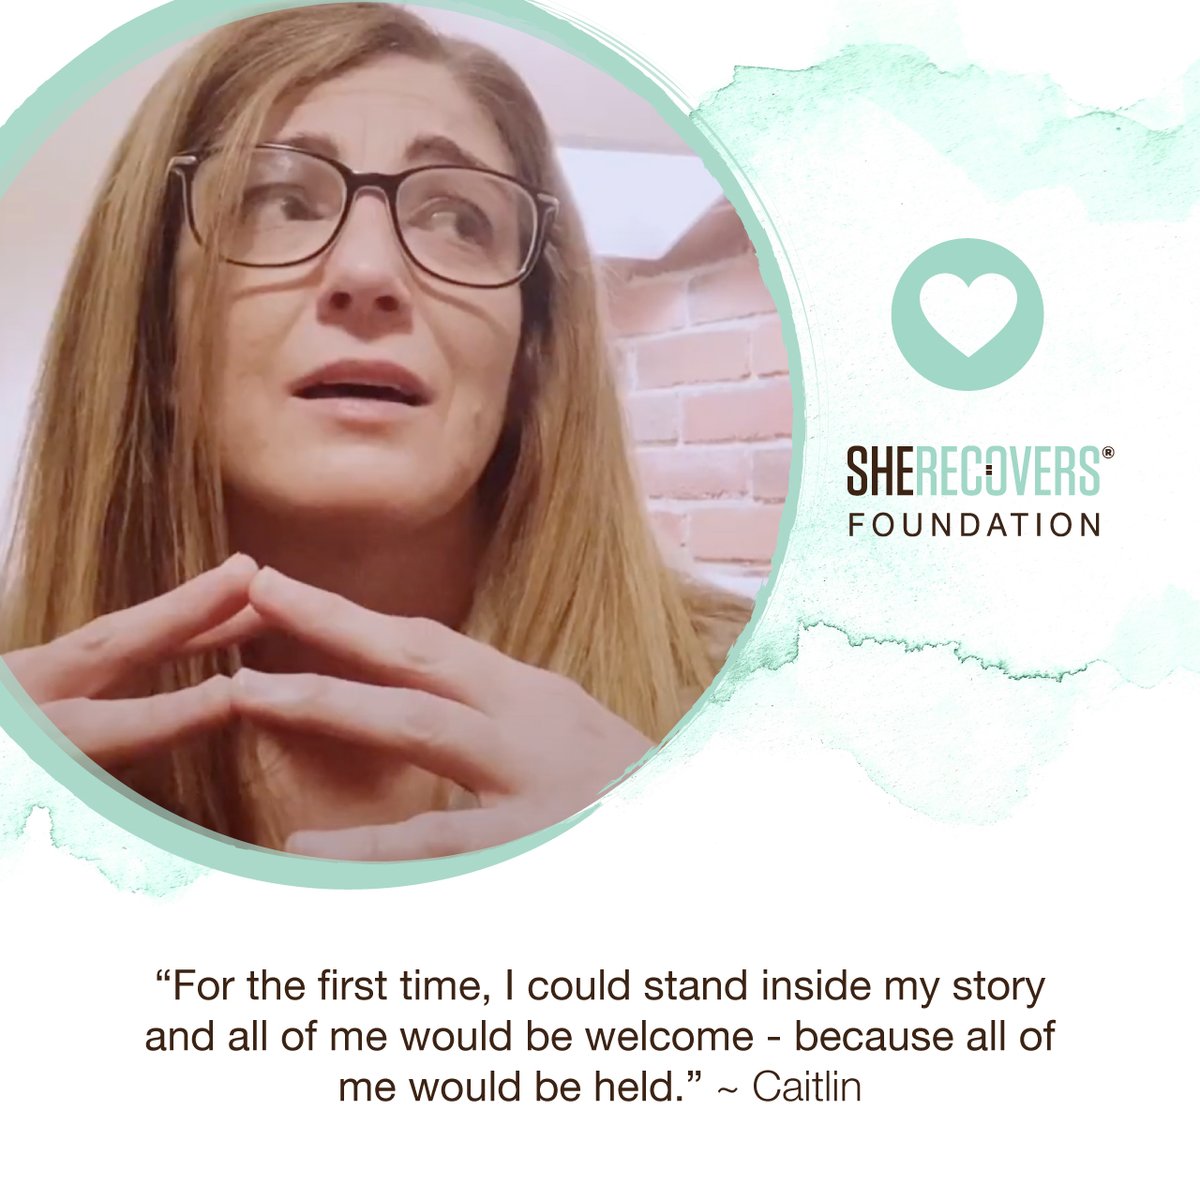 “For the first time, I could stand inside my story and all of me would be welcome - because all of me would be held.”— Caitlin  

Feel the joy of the holiday season by giving the gift of recovery 💝 bit.ly/3UceD2k 

#SHERECOVERS #GiftsofRecovery #RedefineRecovery